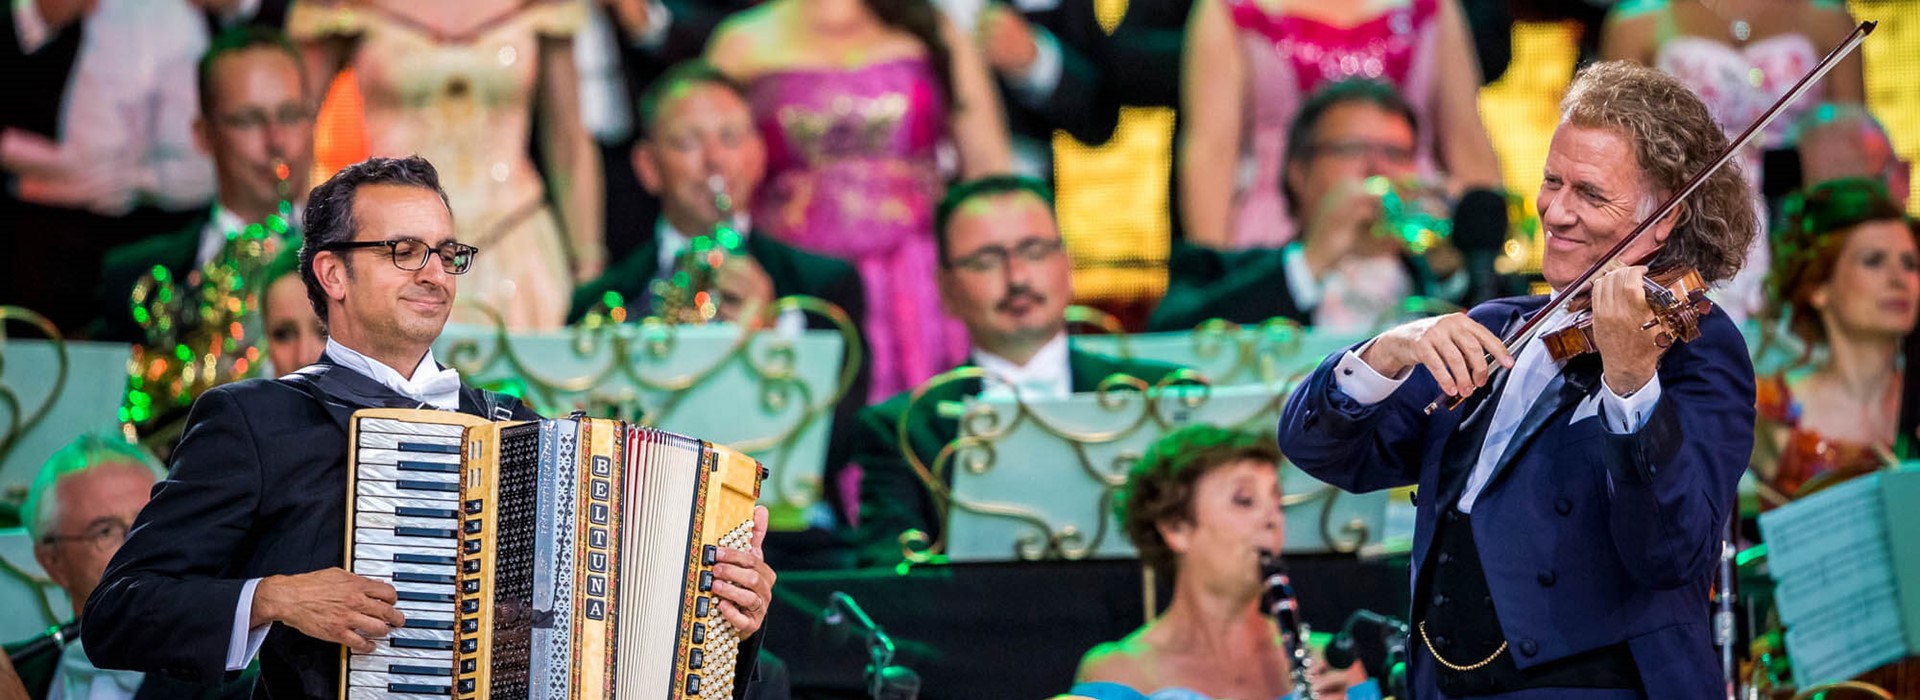 tourhub | Newmarket Holidays | Andre Rieu in Maastricht by Air - 5 days | 18874